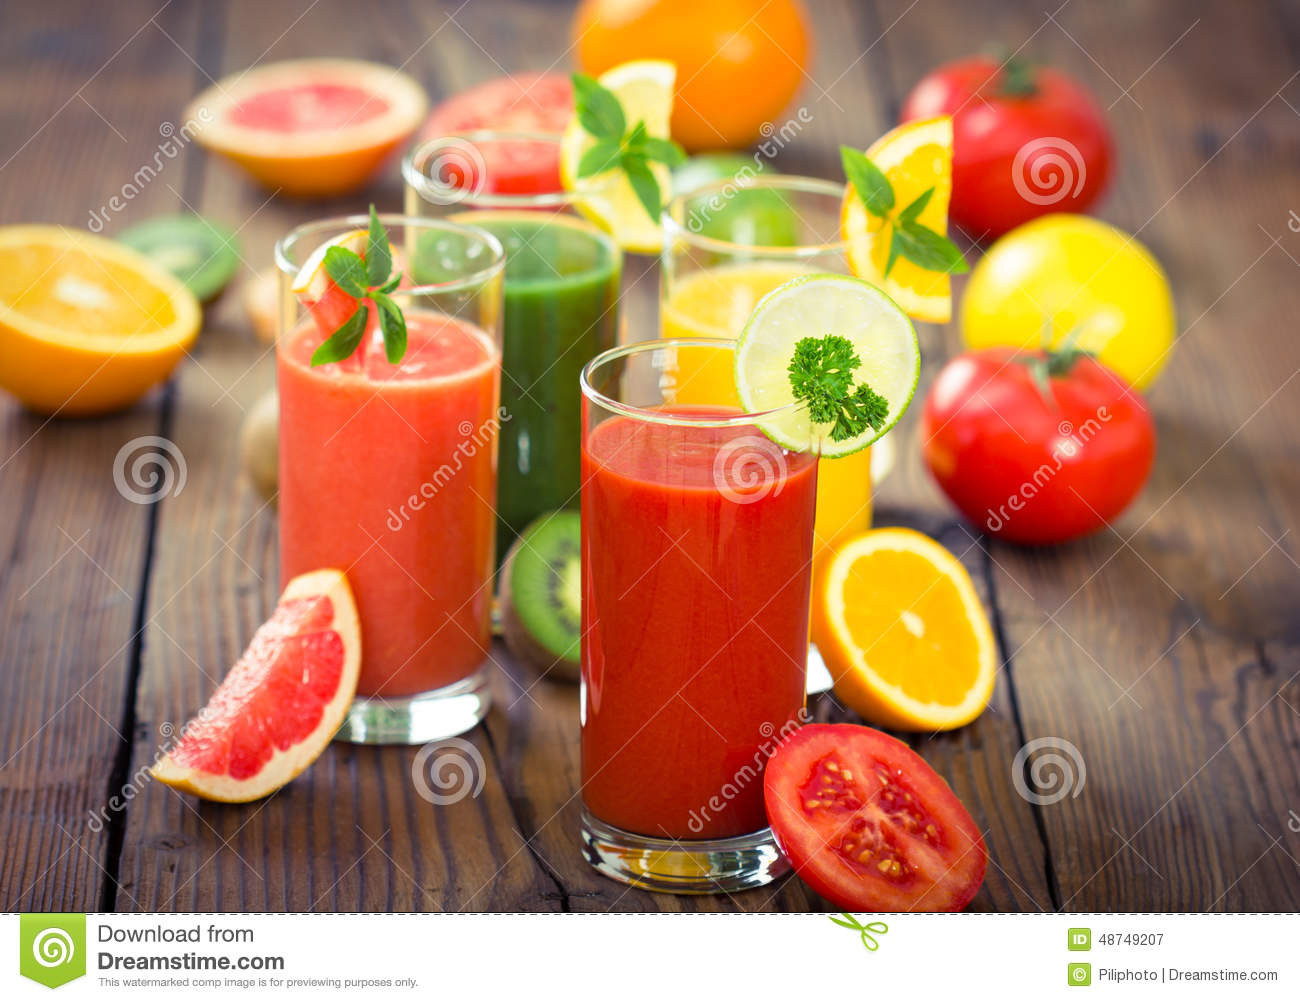 Healthy Fruit And Veggie Smoothies
 Healthy Fruits And Ve ables Smoothies Stock Image